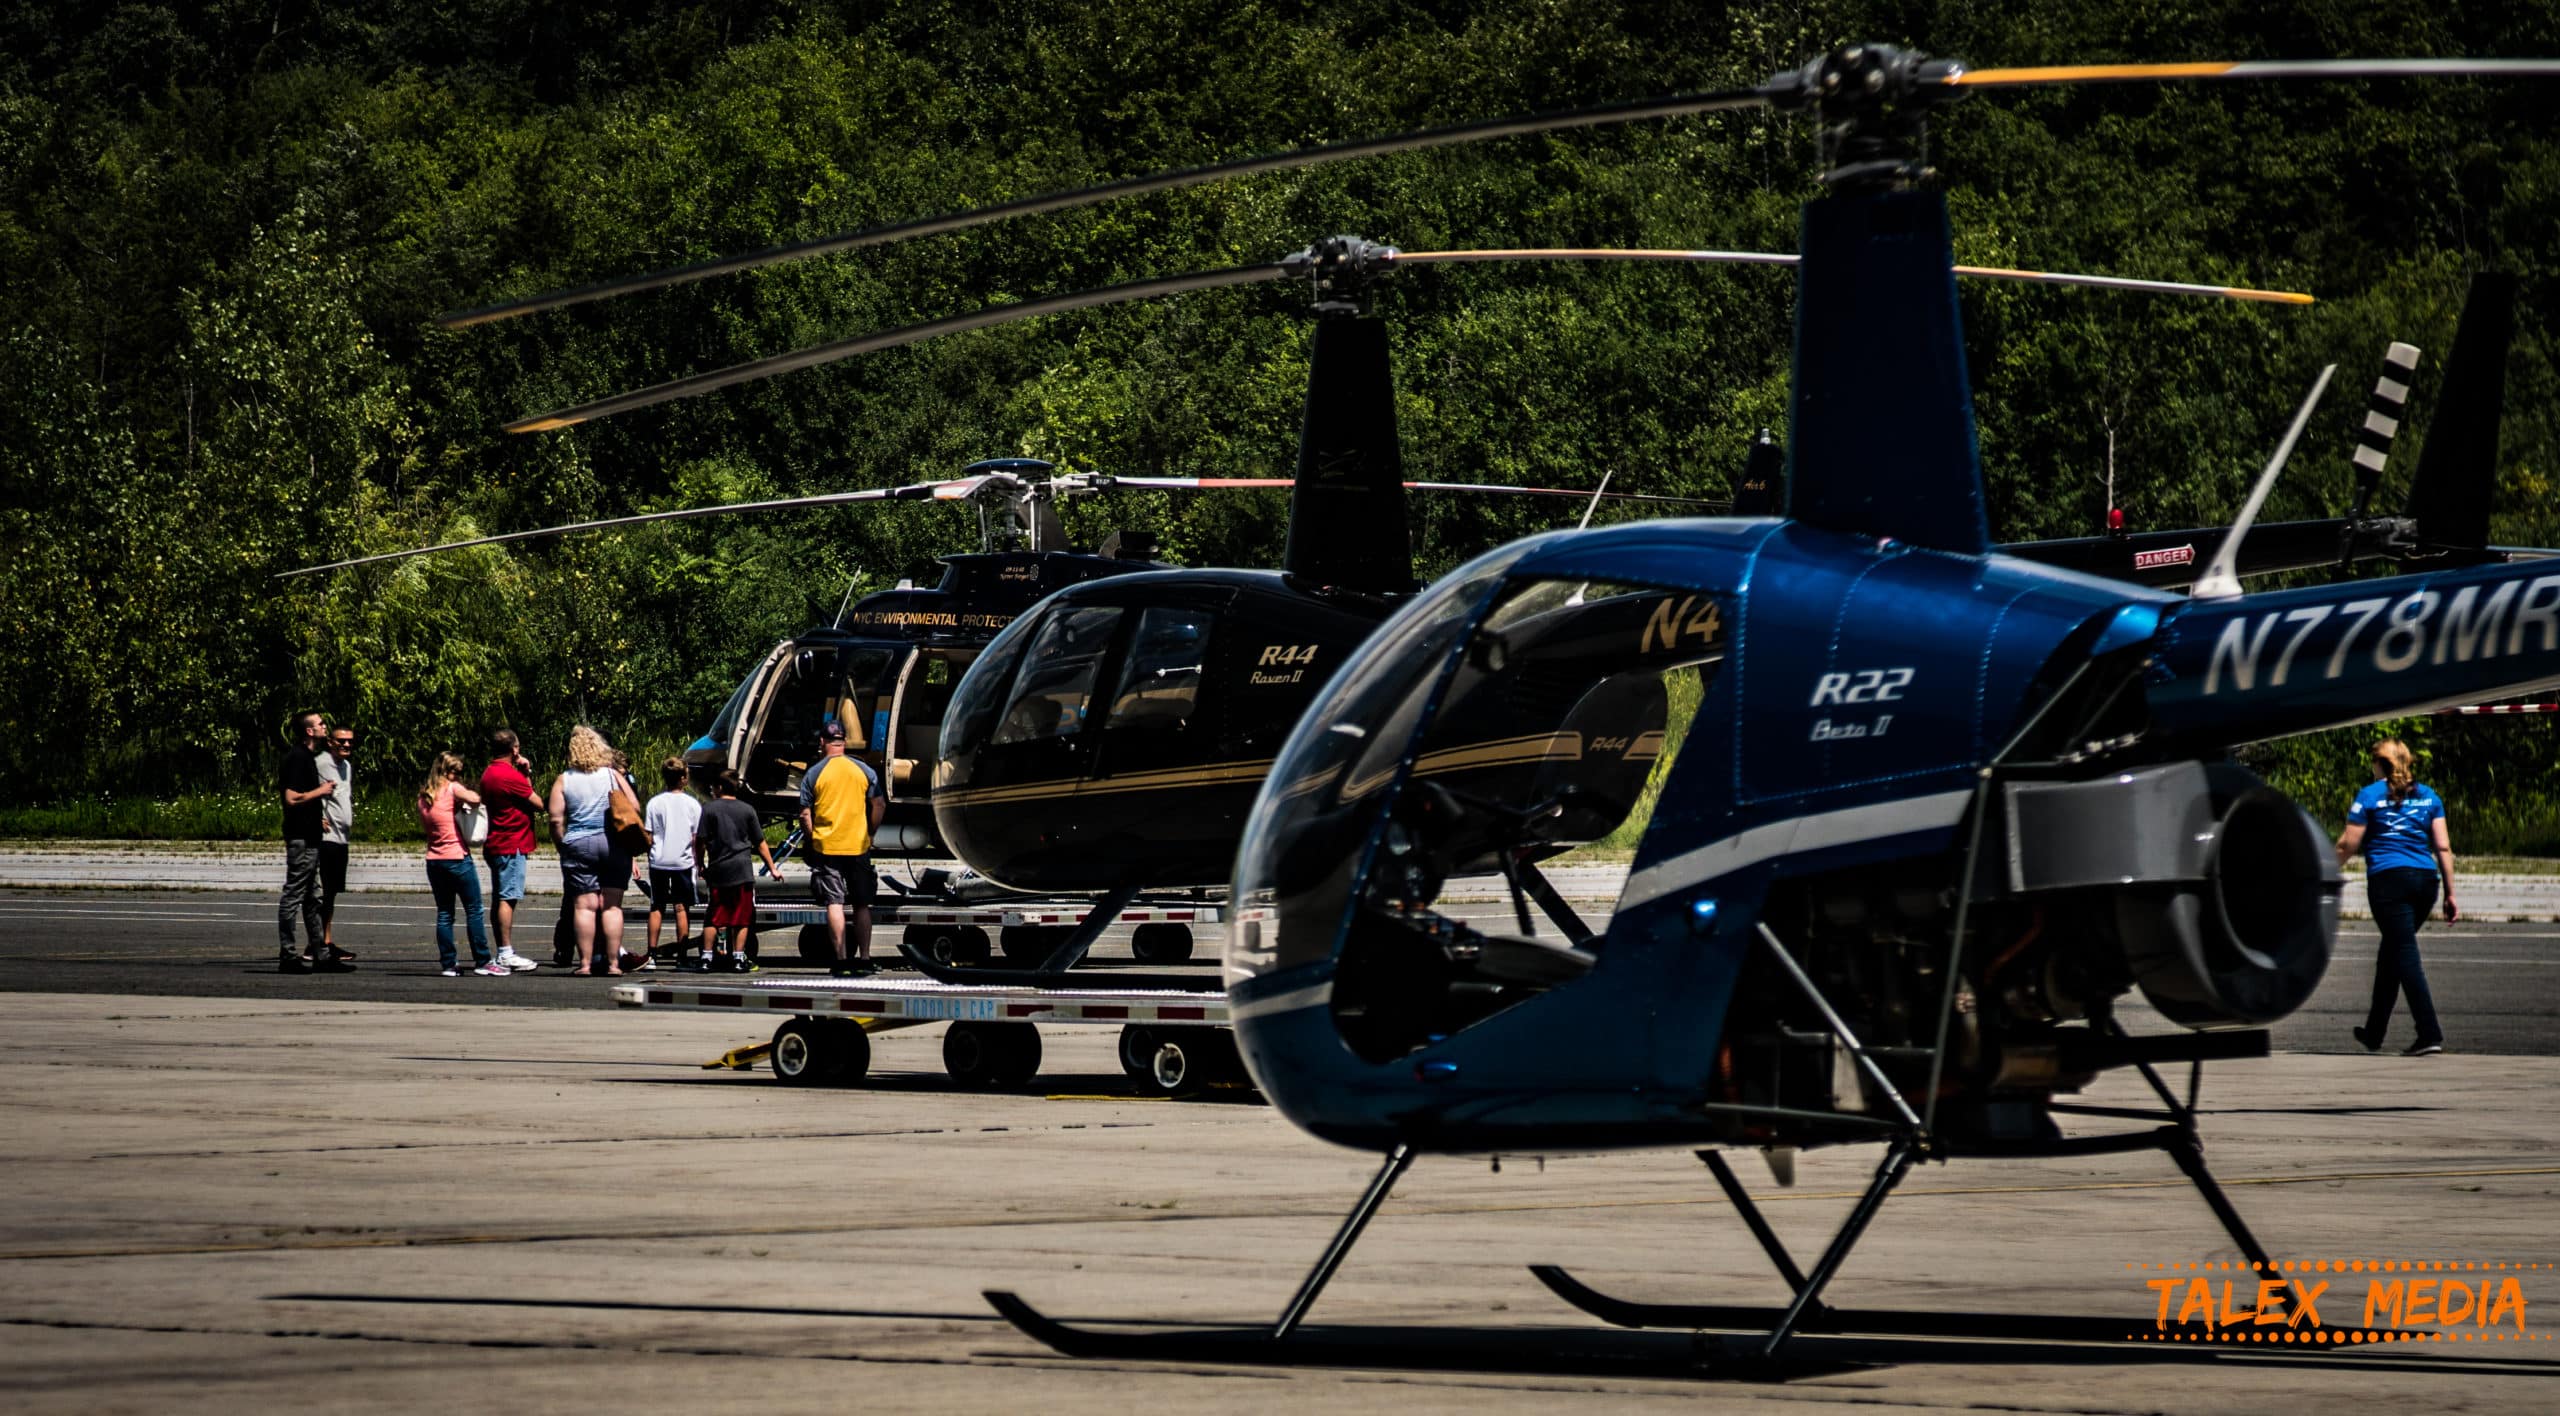 World Helicopter Day at Stewart Airport